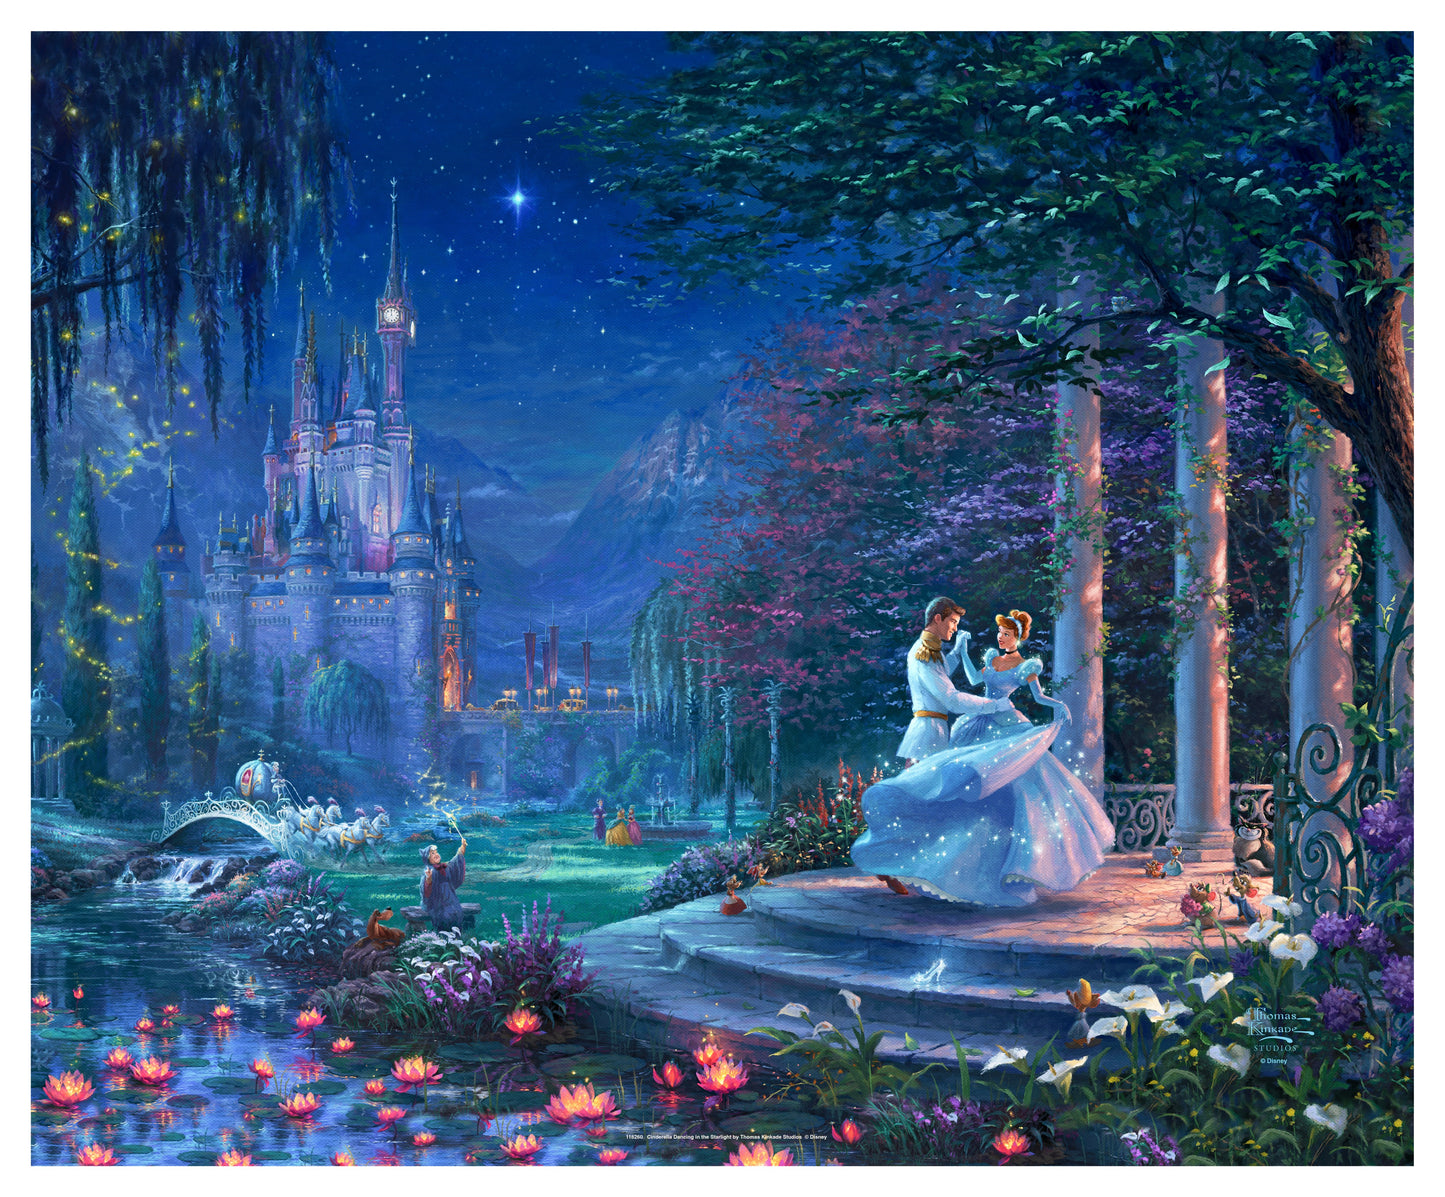 Cinderella is in the arms of her prince. Cinderella's dreams have come true under the Starlight